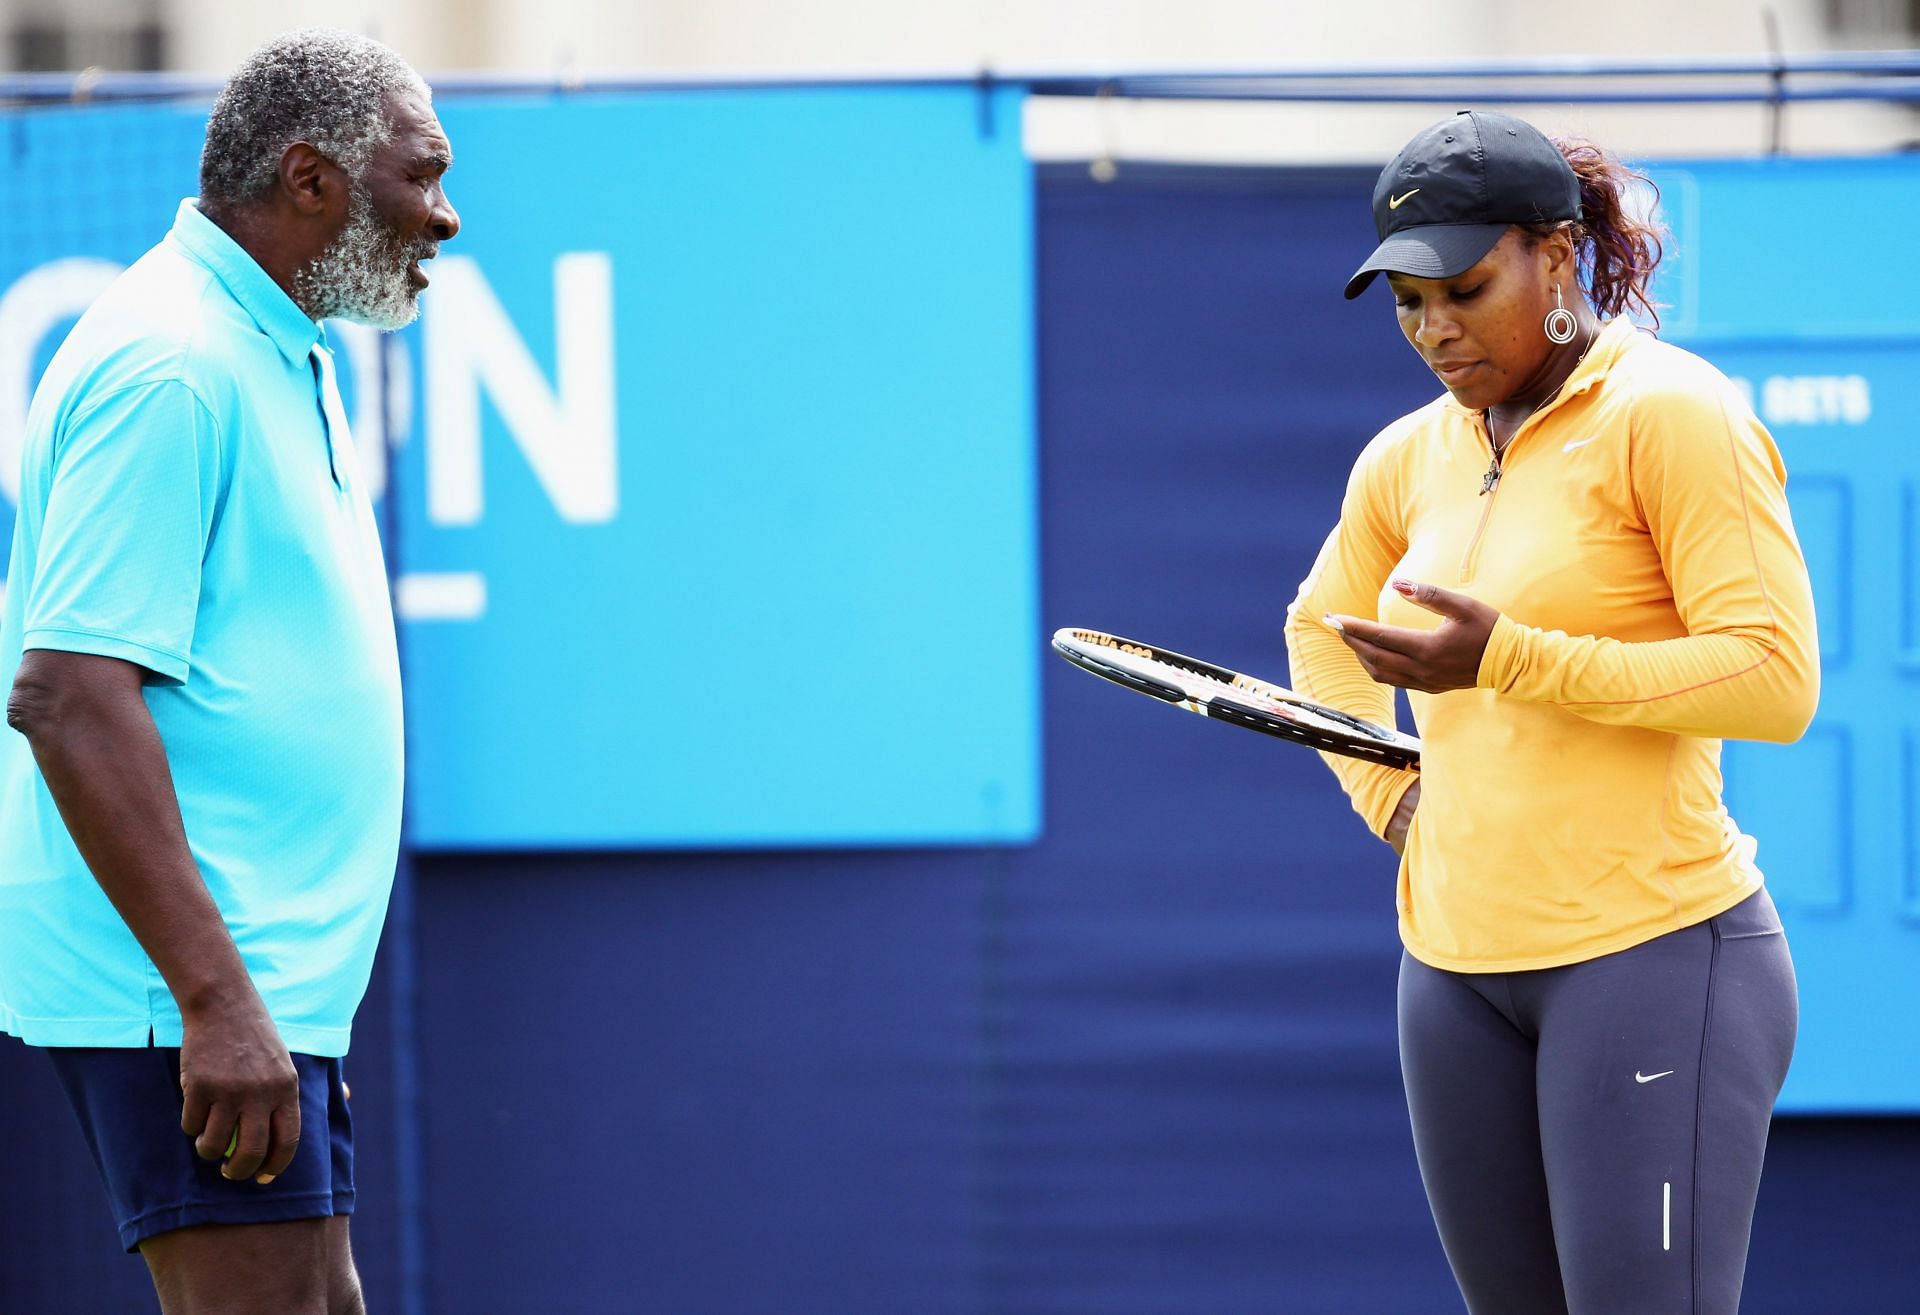 Serena chatting with her father Richard during a break circa 2011